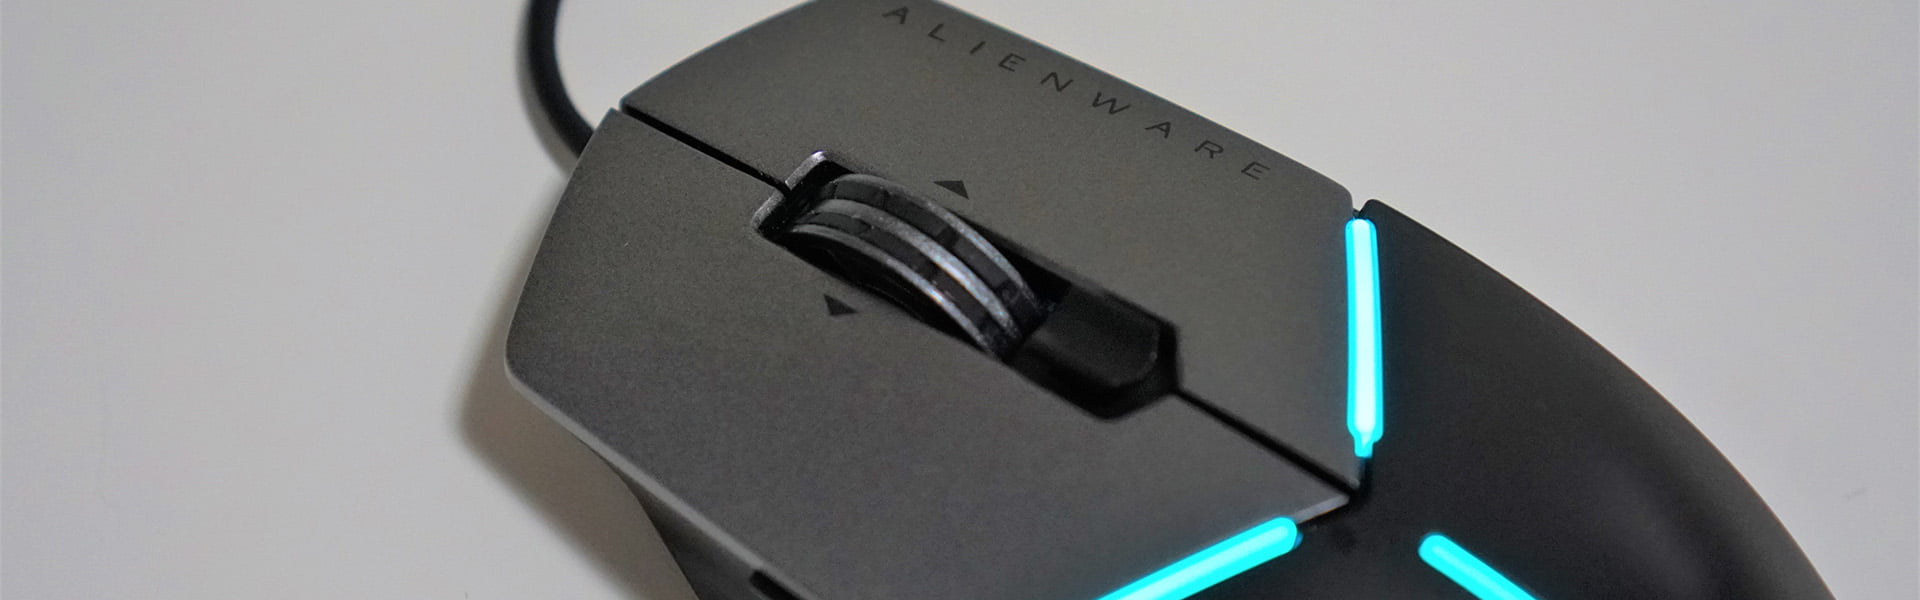 Alienware Advanced Gaming Mouse (AW558) Review 29